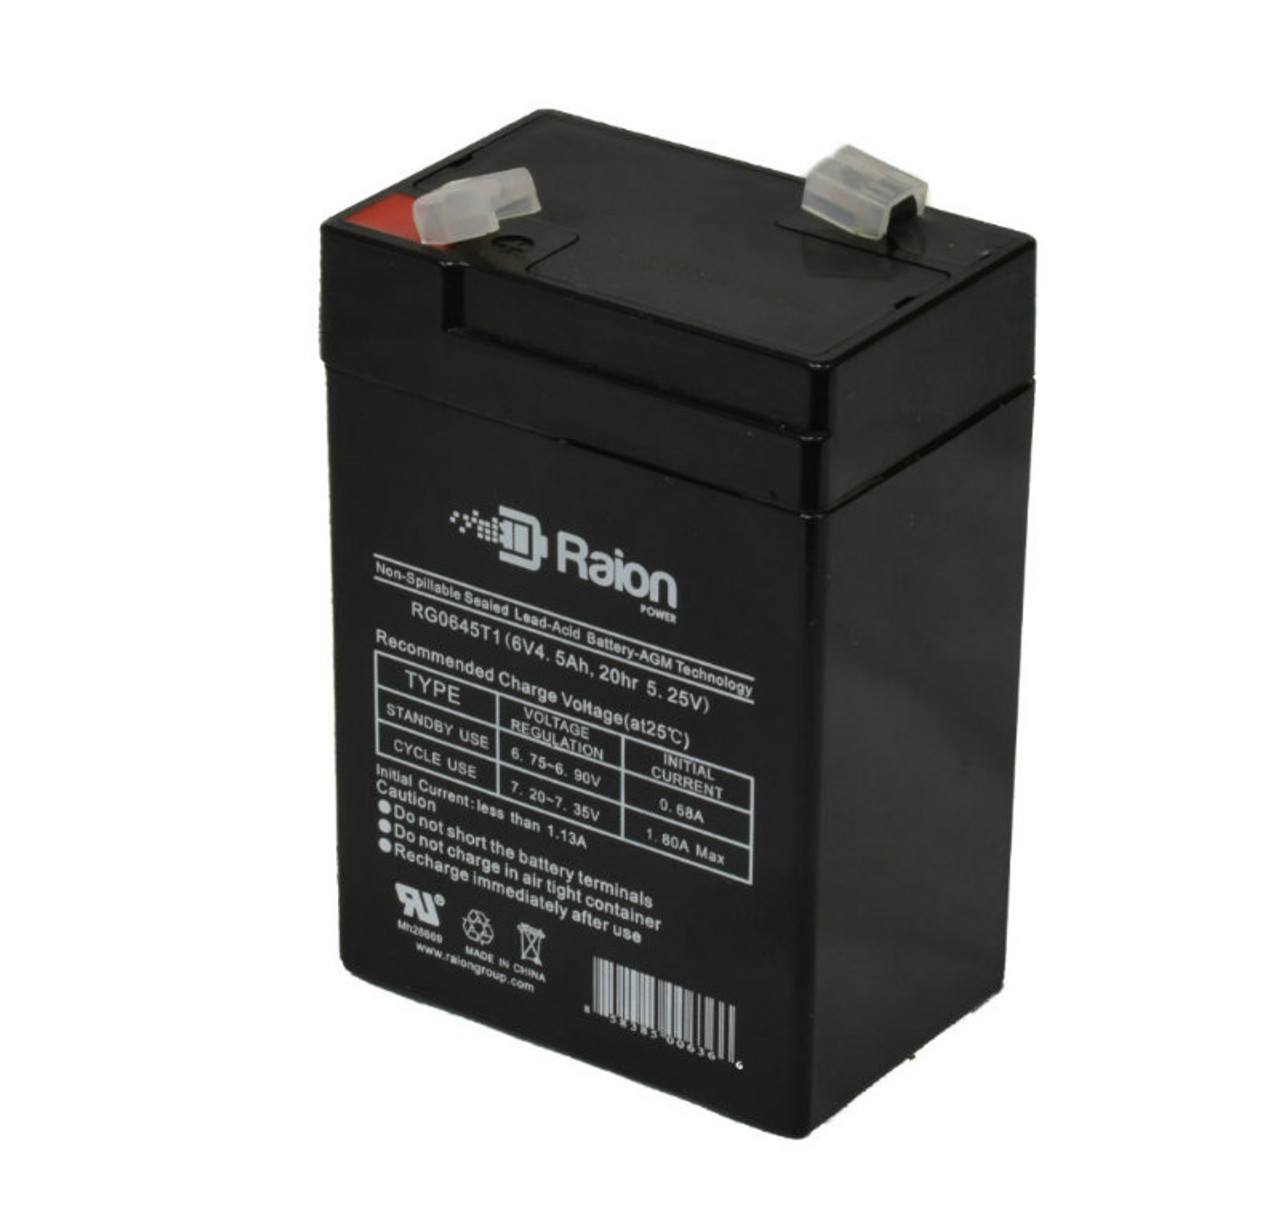 Raion Power RG0645T1 6V 4.5Ah Replacement Battery Cartridge for Power-Sonic PS-640